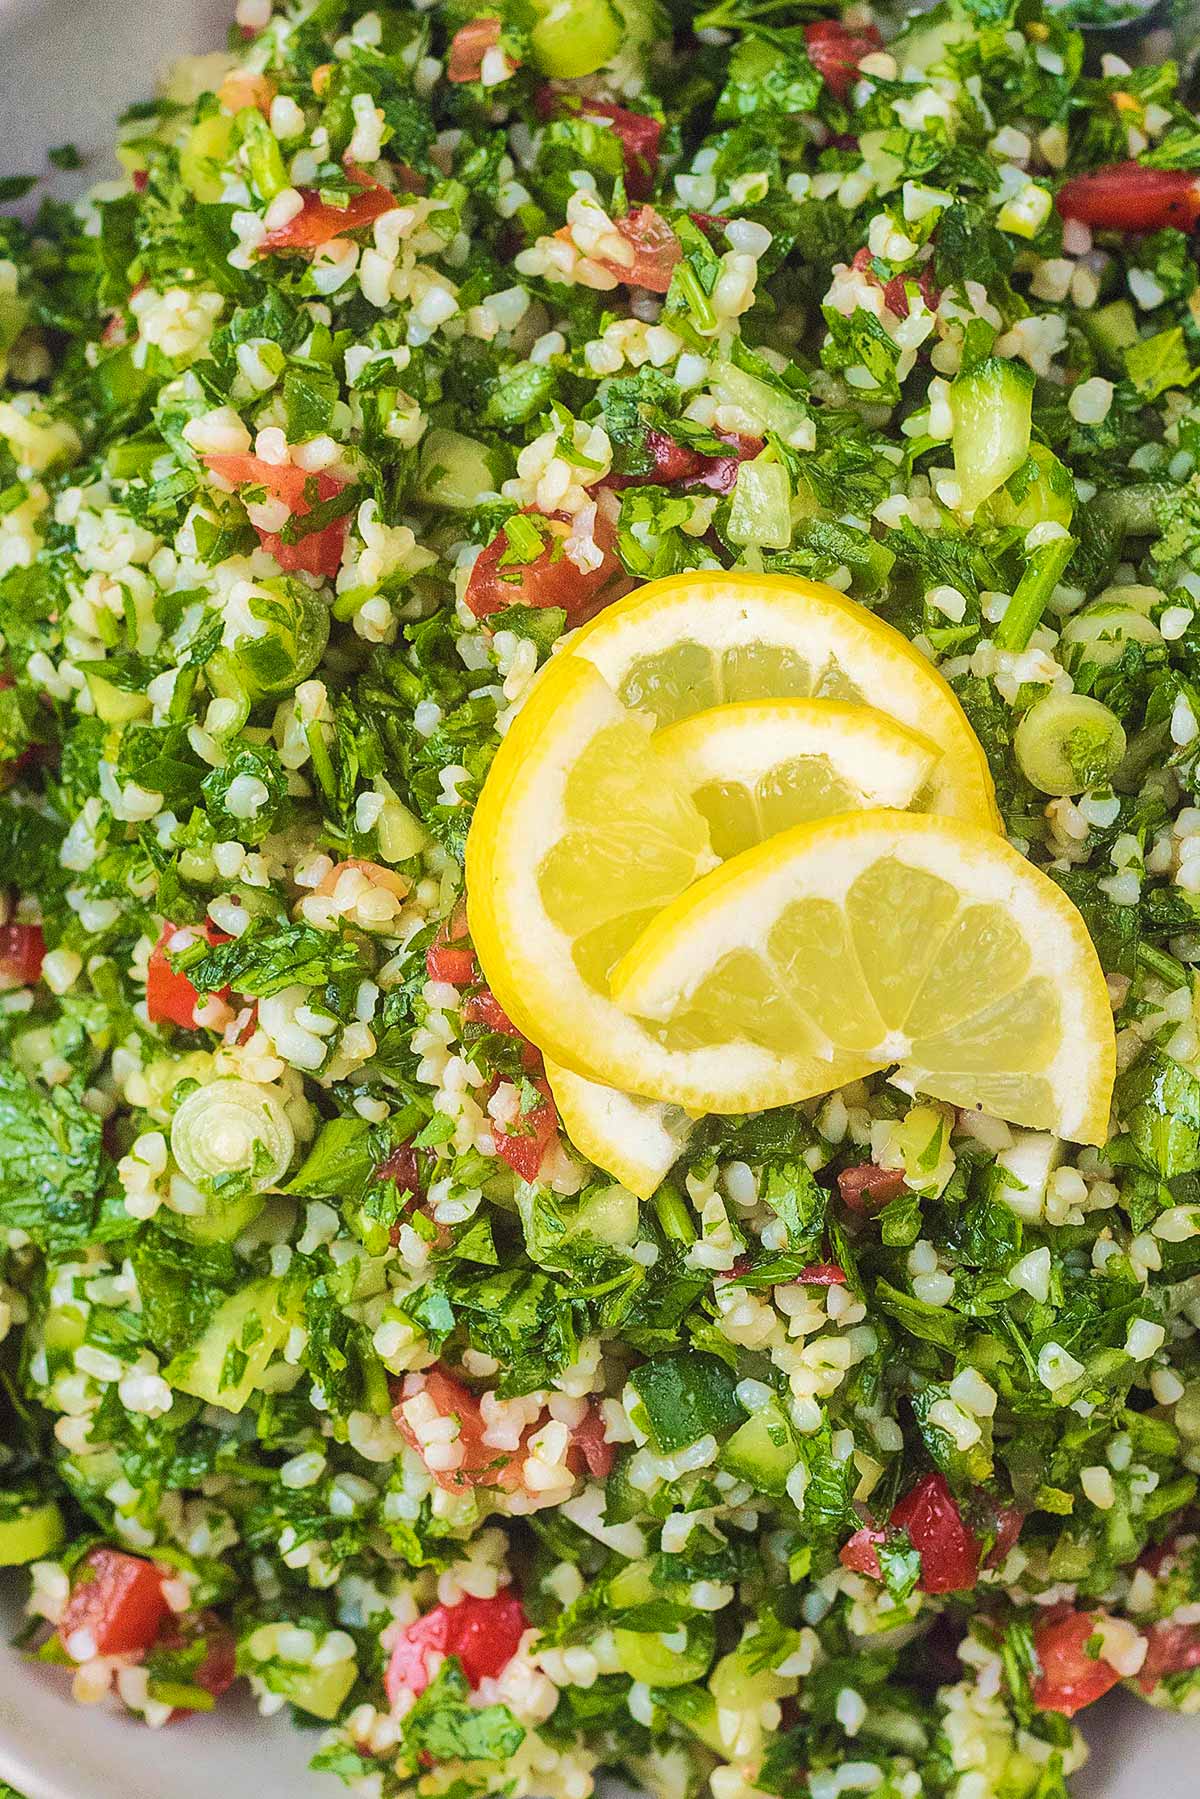 Four lemon slices on top of a serving of tabbouleh.